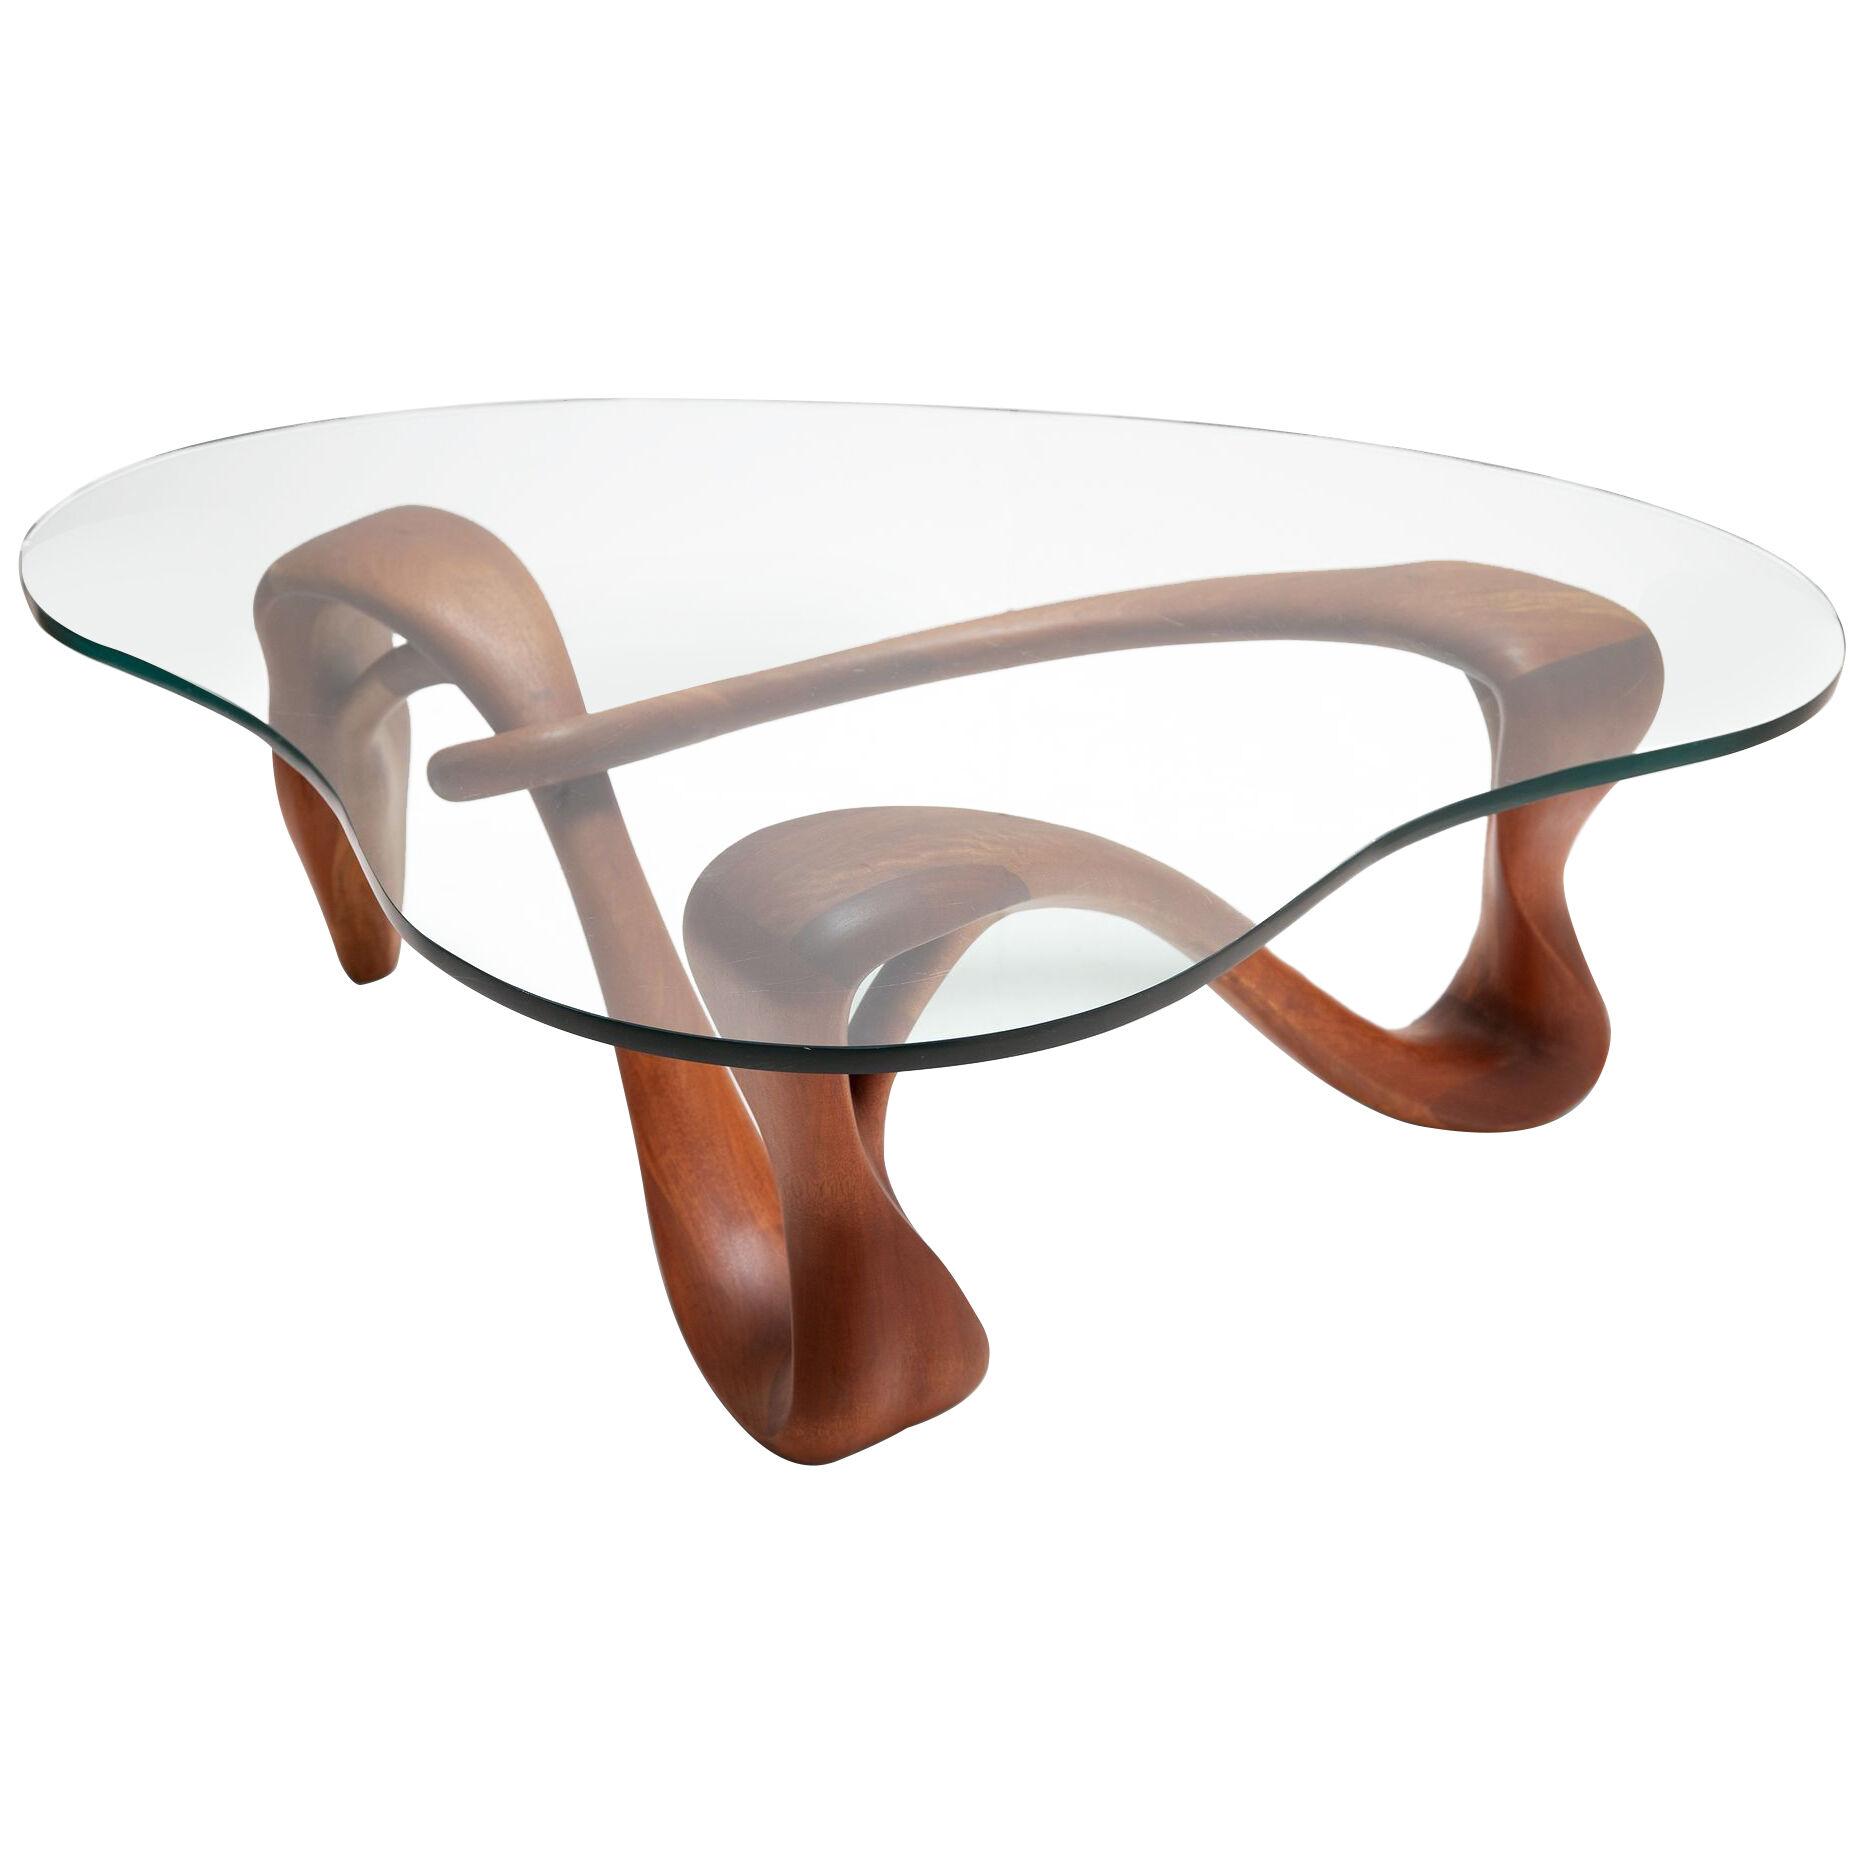 Sinuous Studio Craft Cocktail Table in Solid Mahogany w Biomorphic Glass 1960s